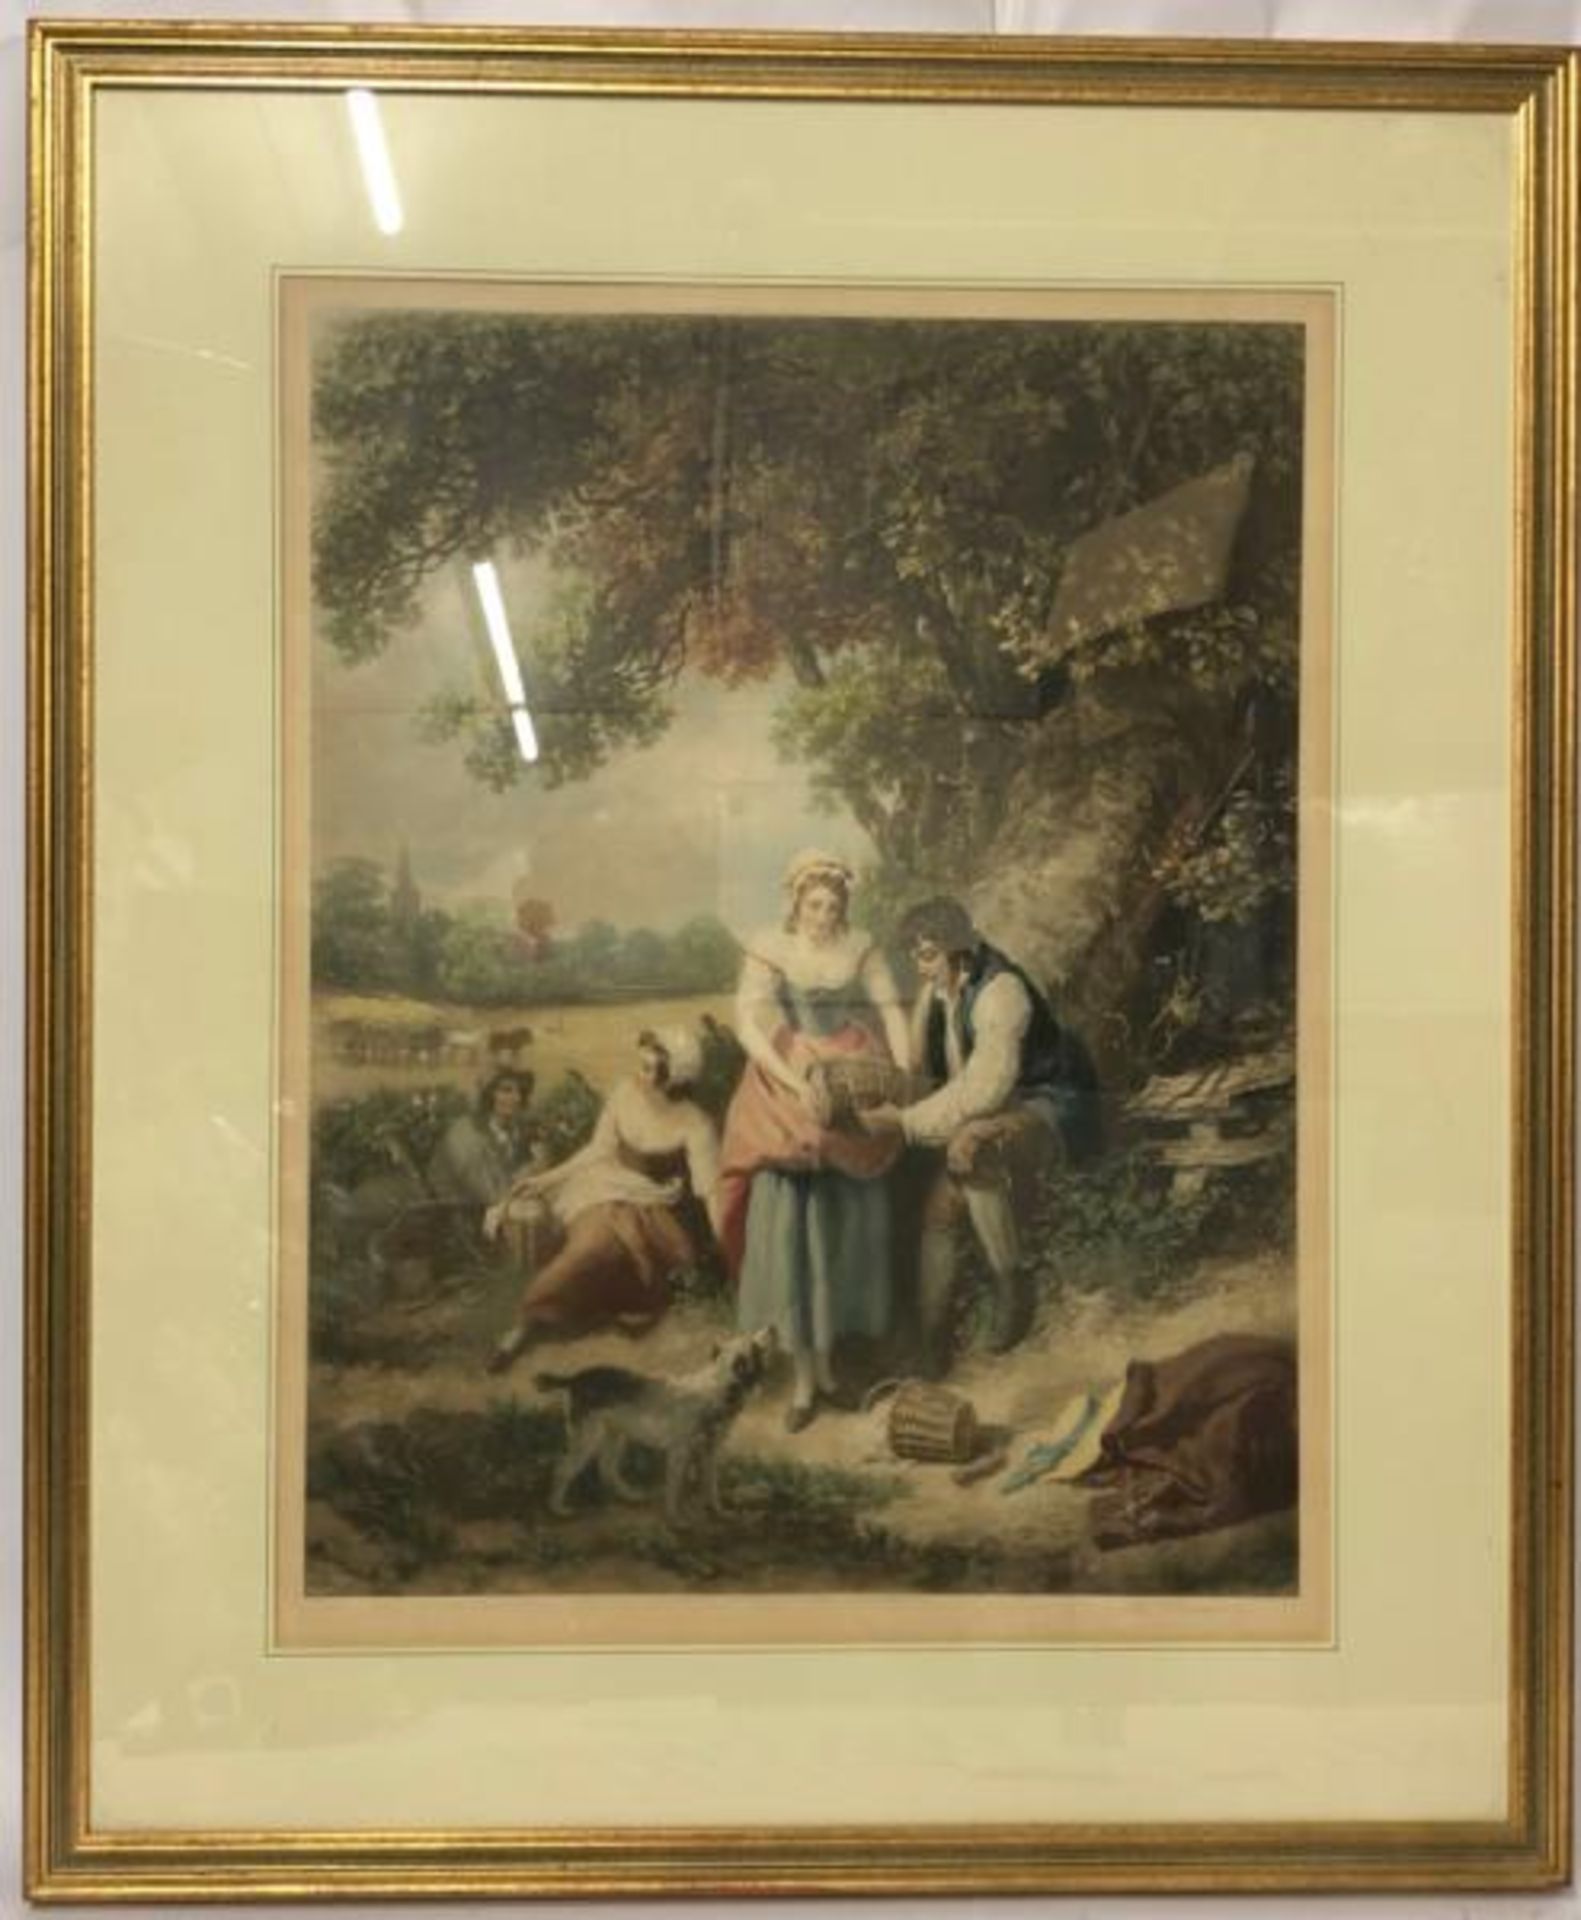 A large mezzotint engraving, signed by the engraver, 50 x 65cm / AN55